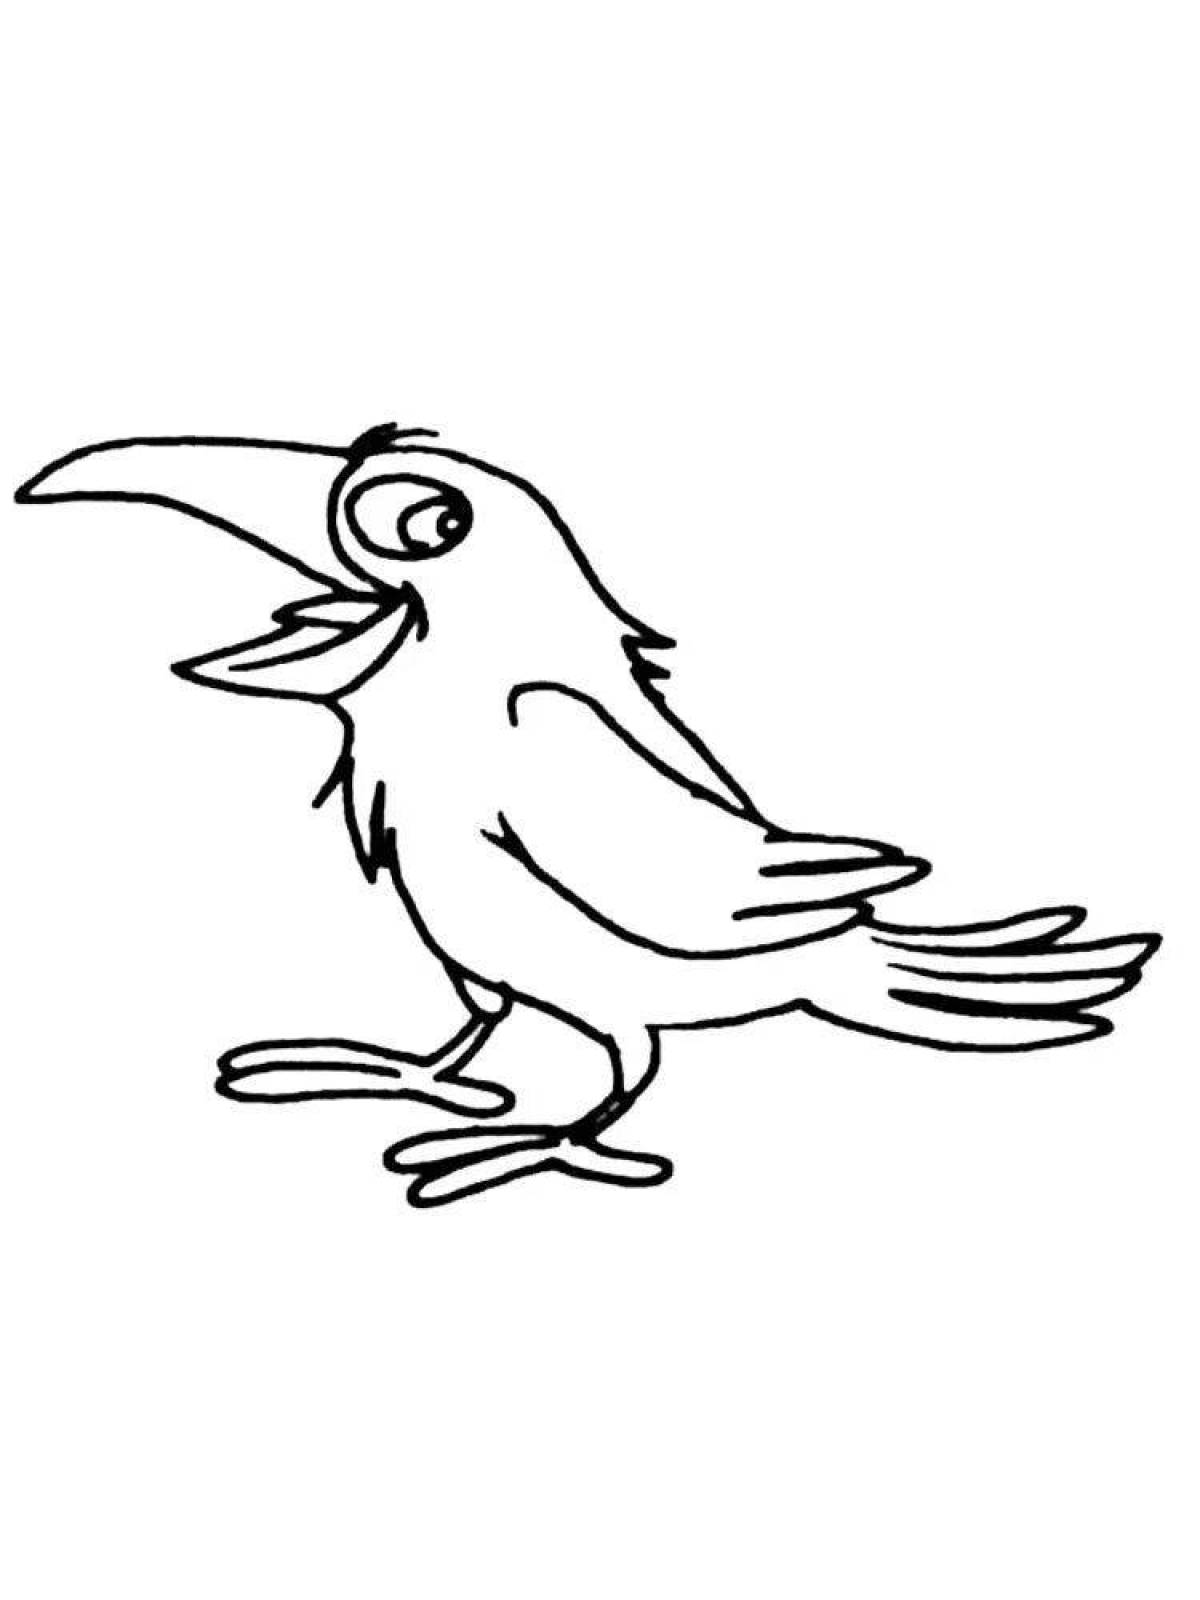 Coloring book cheerful sparrow and crow